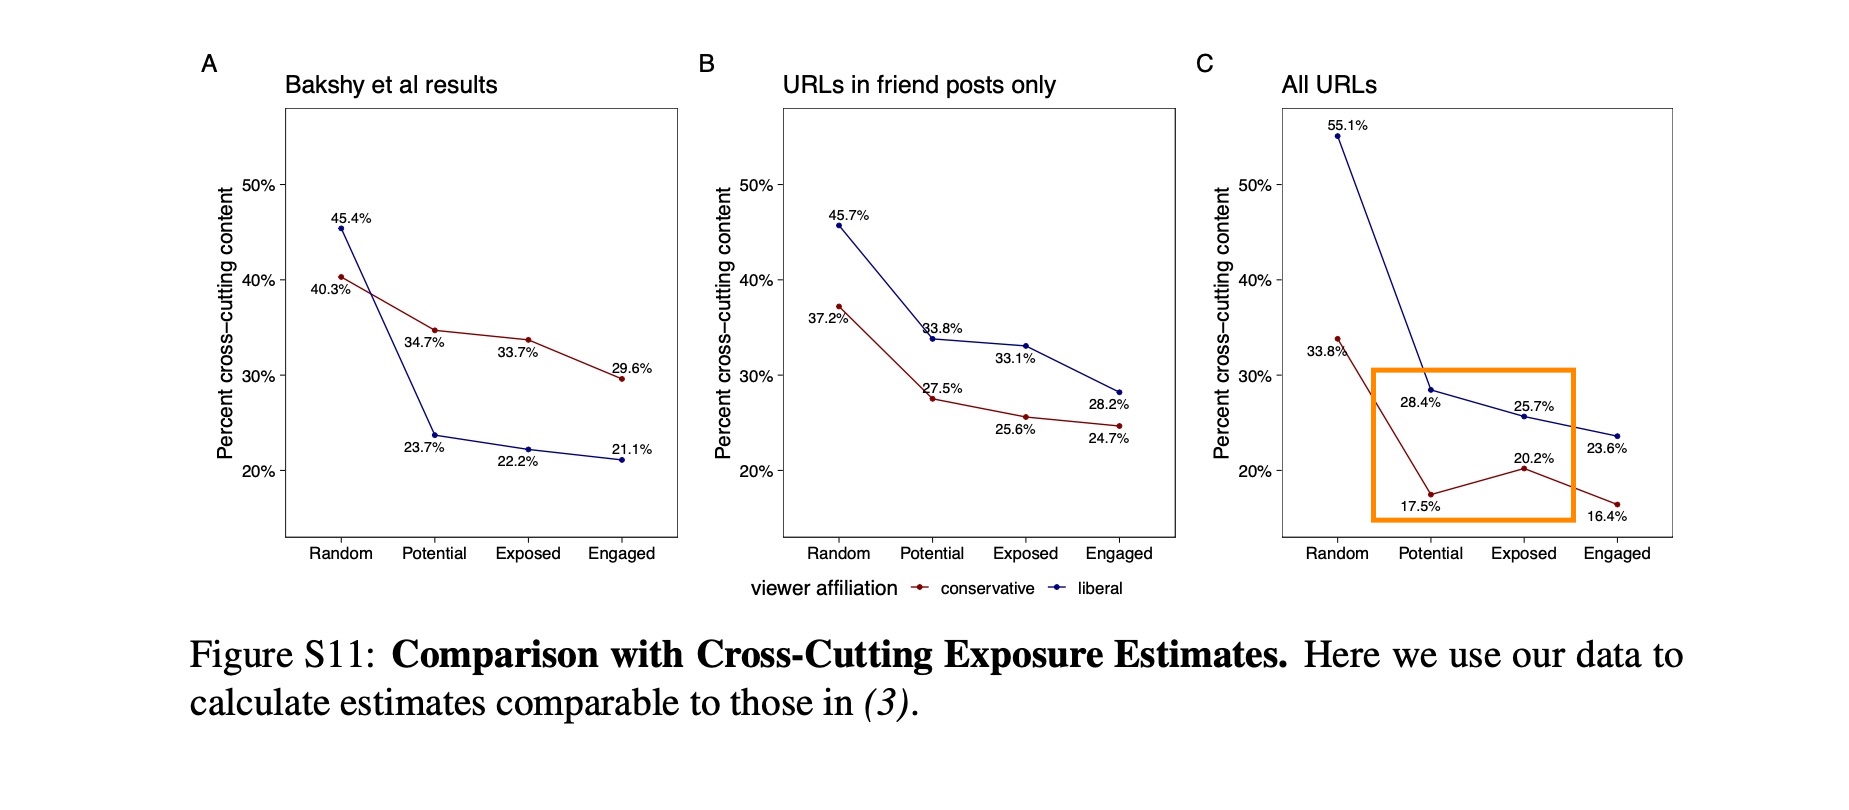 Replication of Bakshy et al 2015, showing little effect of feed-ranking among content shared by friends. However, when including page and group content, feed-ranking plays a more important role&mdash;exposing liberals to proportionally less cross-cutting content and conservatives to comparatively more.